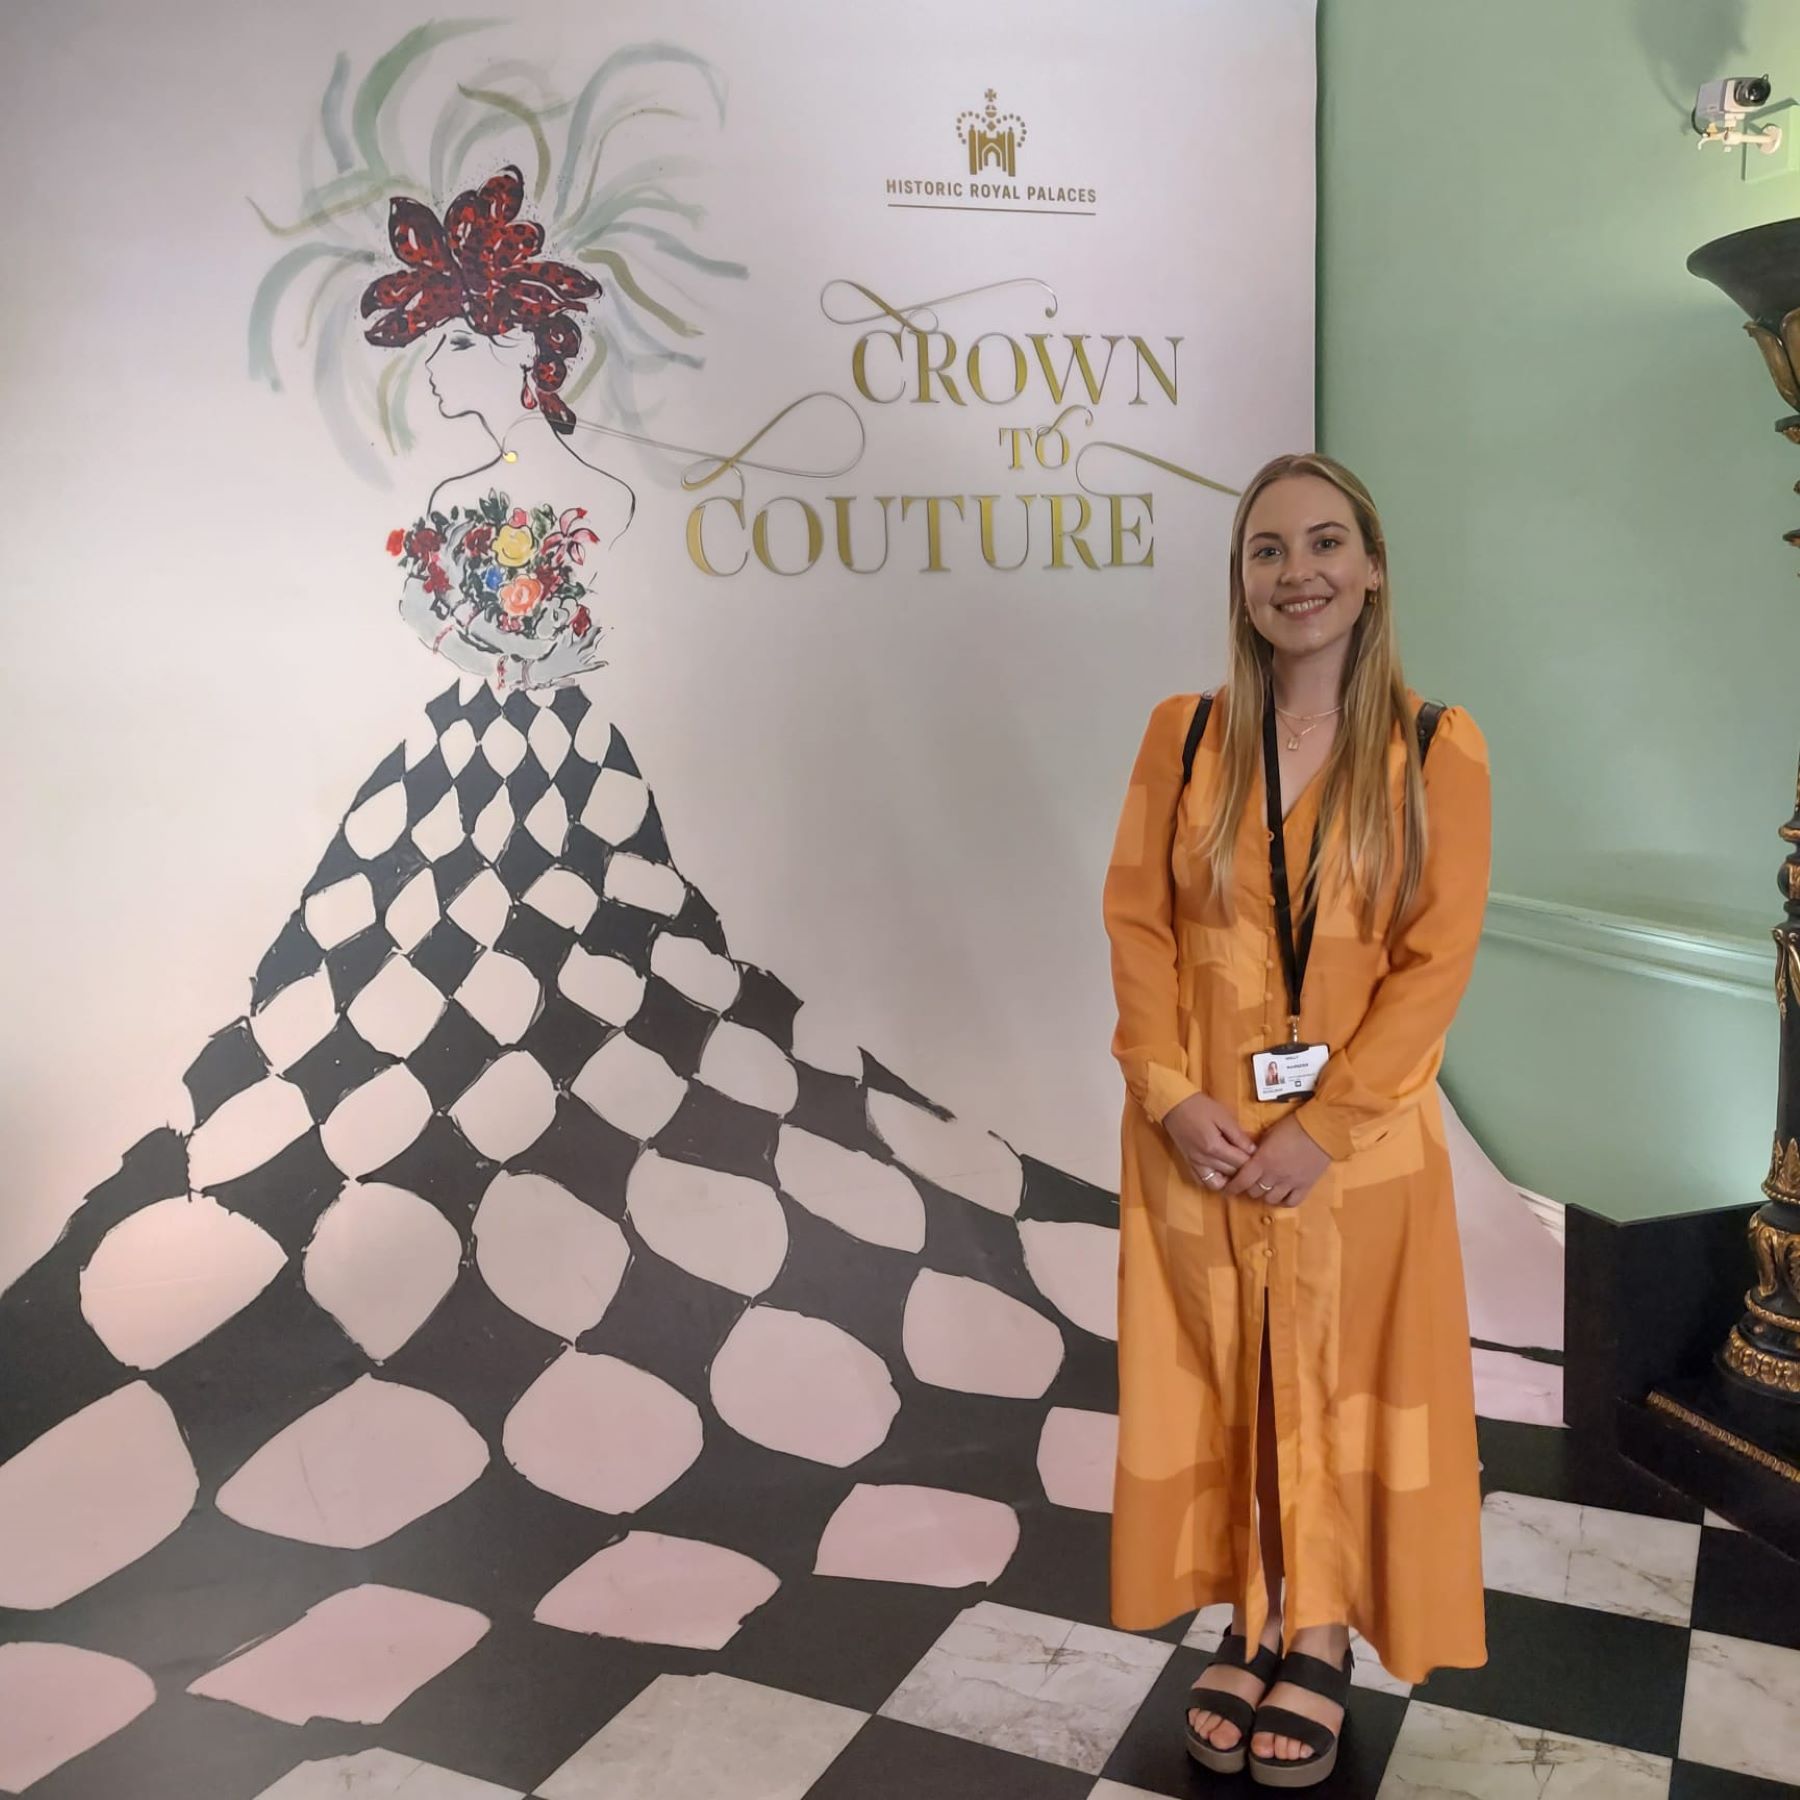 wom,an stood in front of crown to couture poster